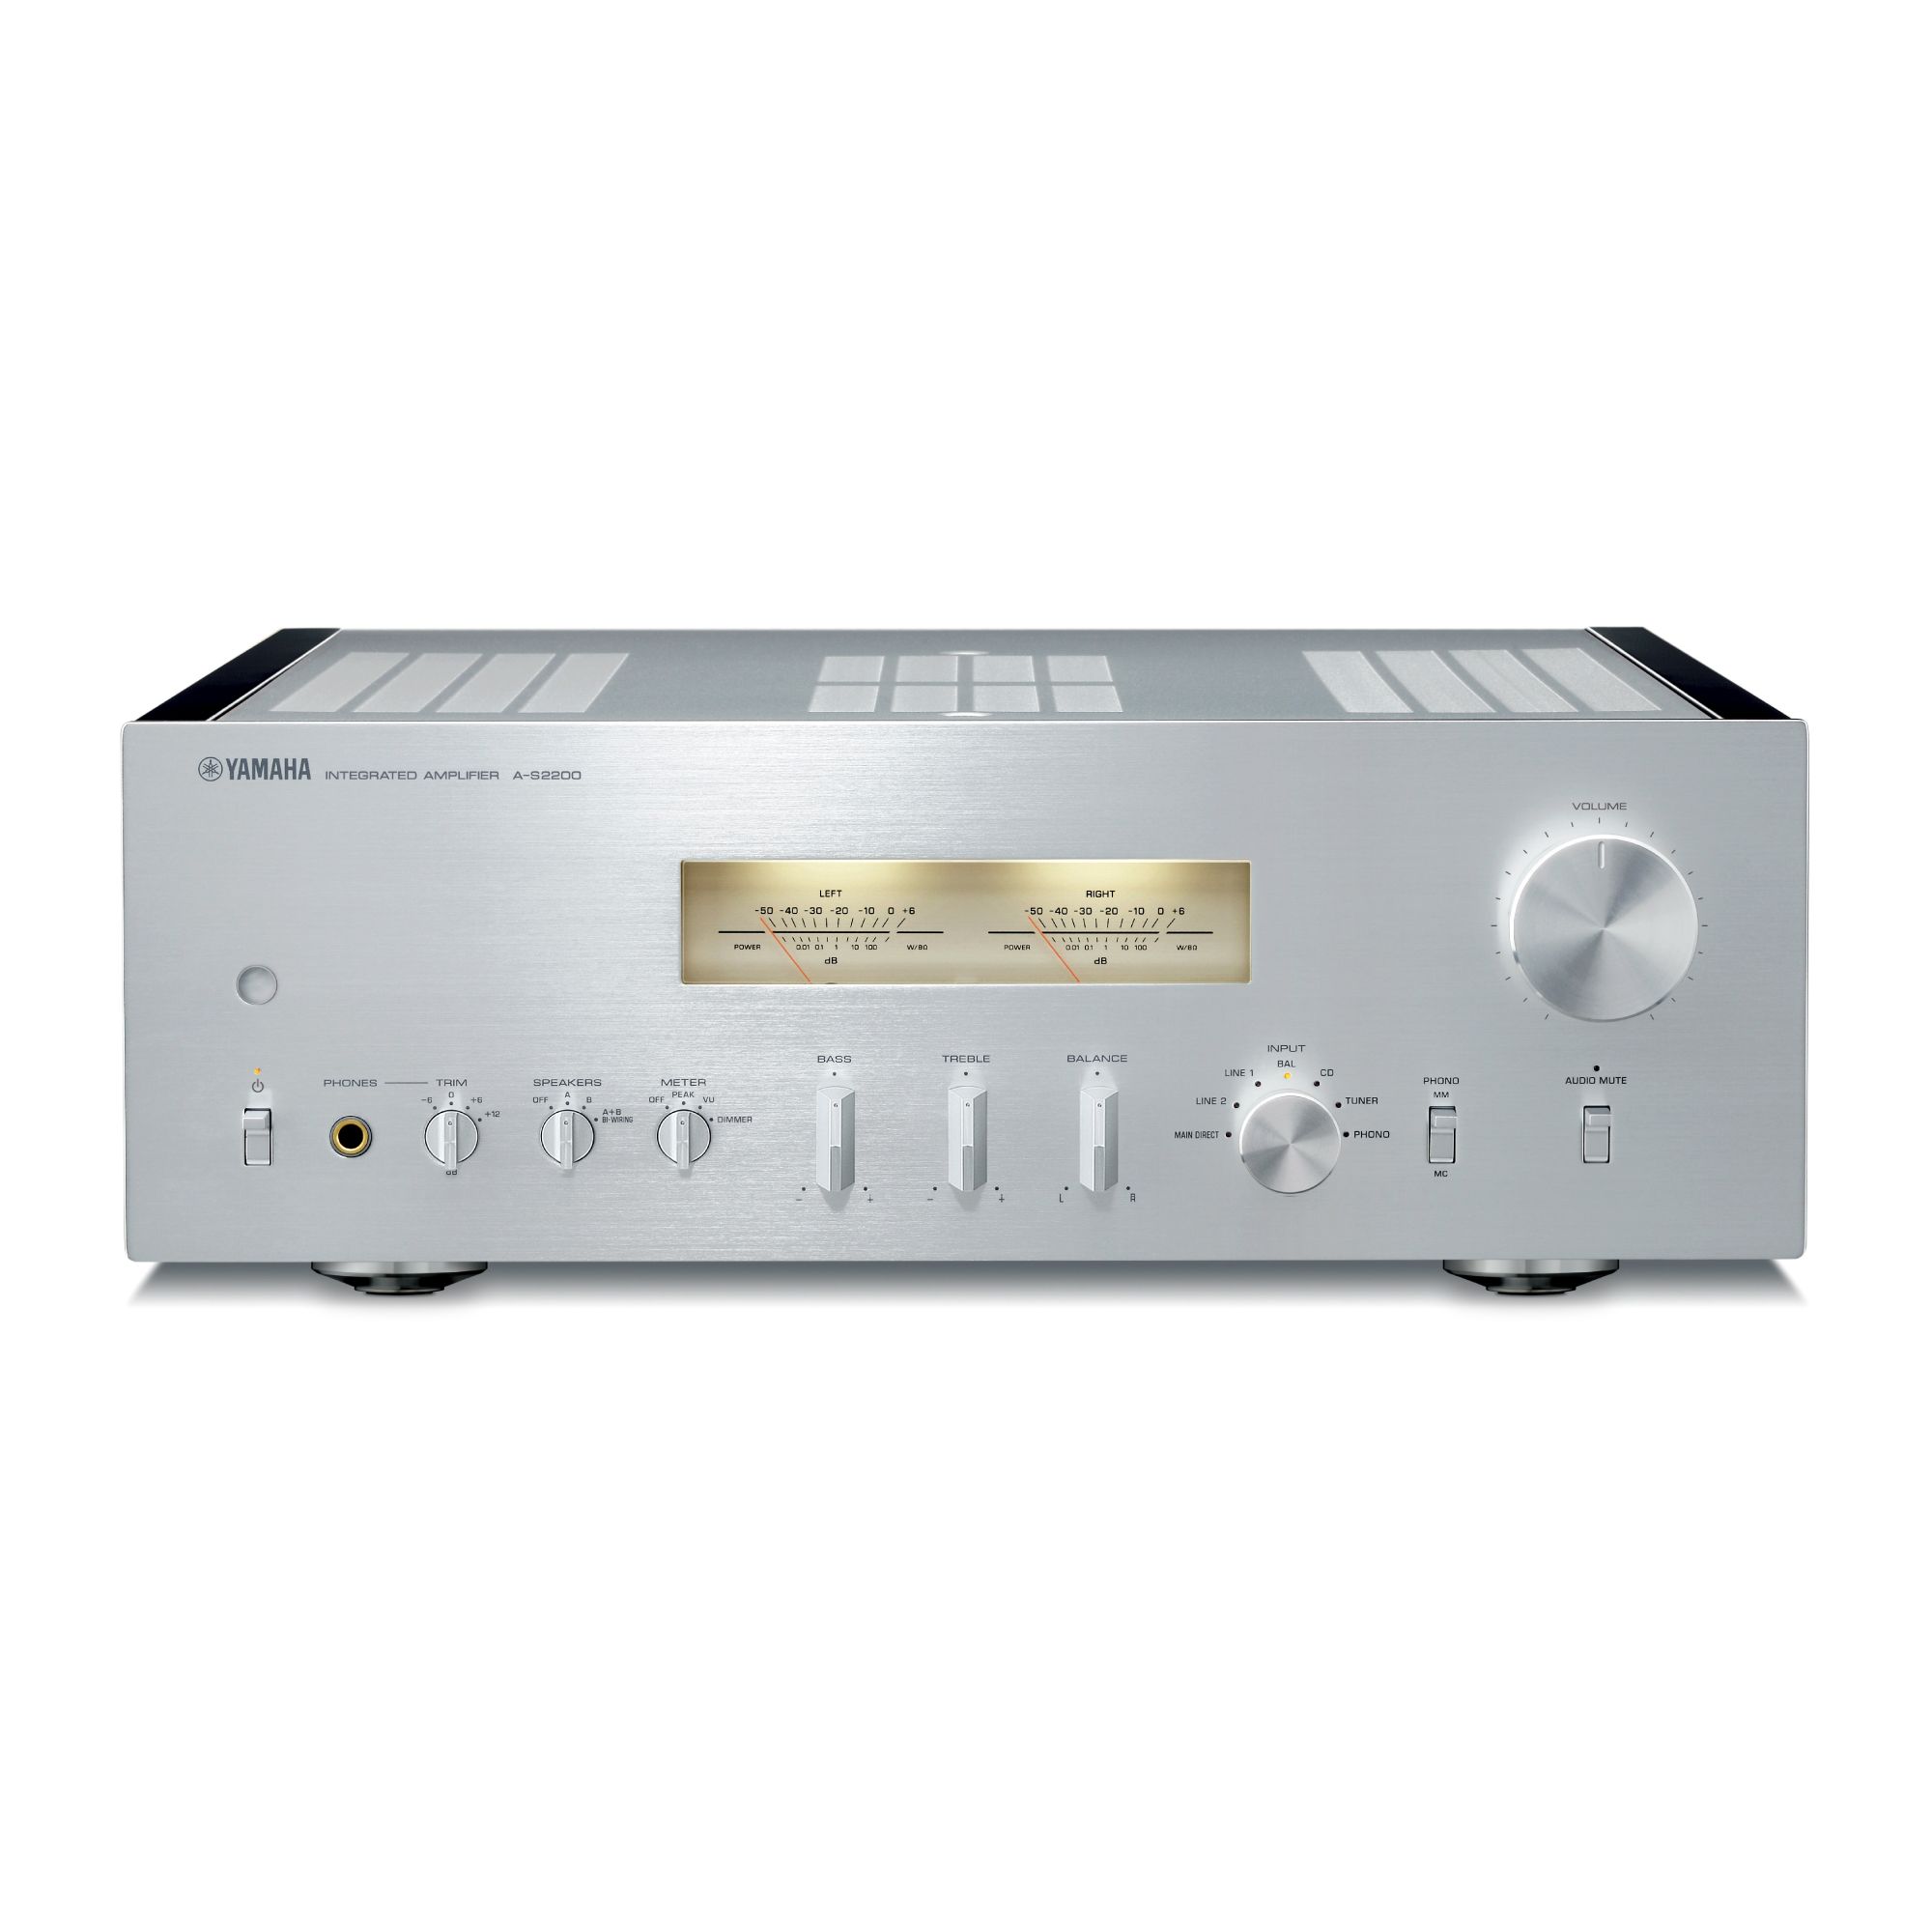 A-S2200 - Overview - HiFi Components - Audio & Visual - Products 